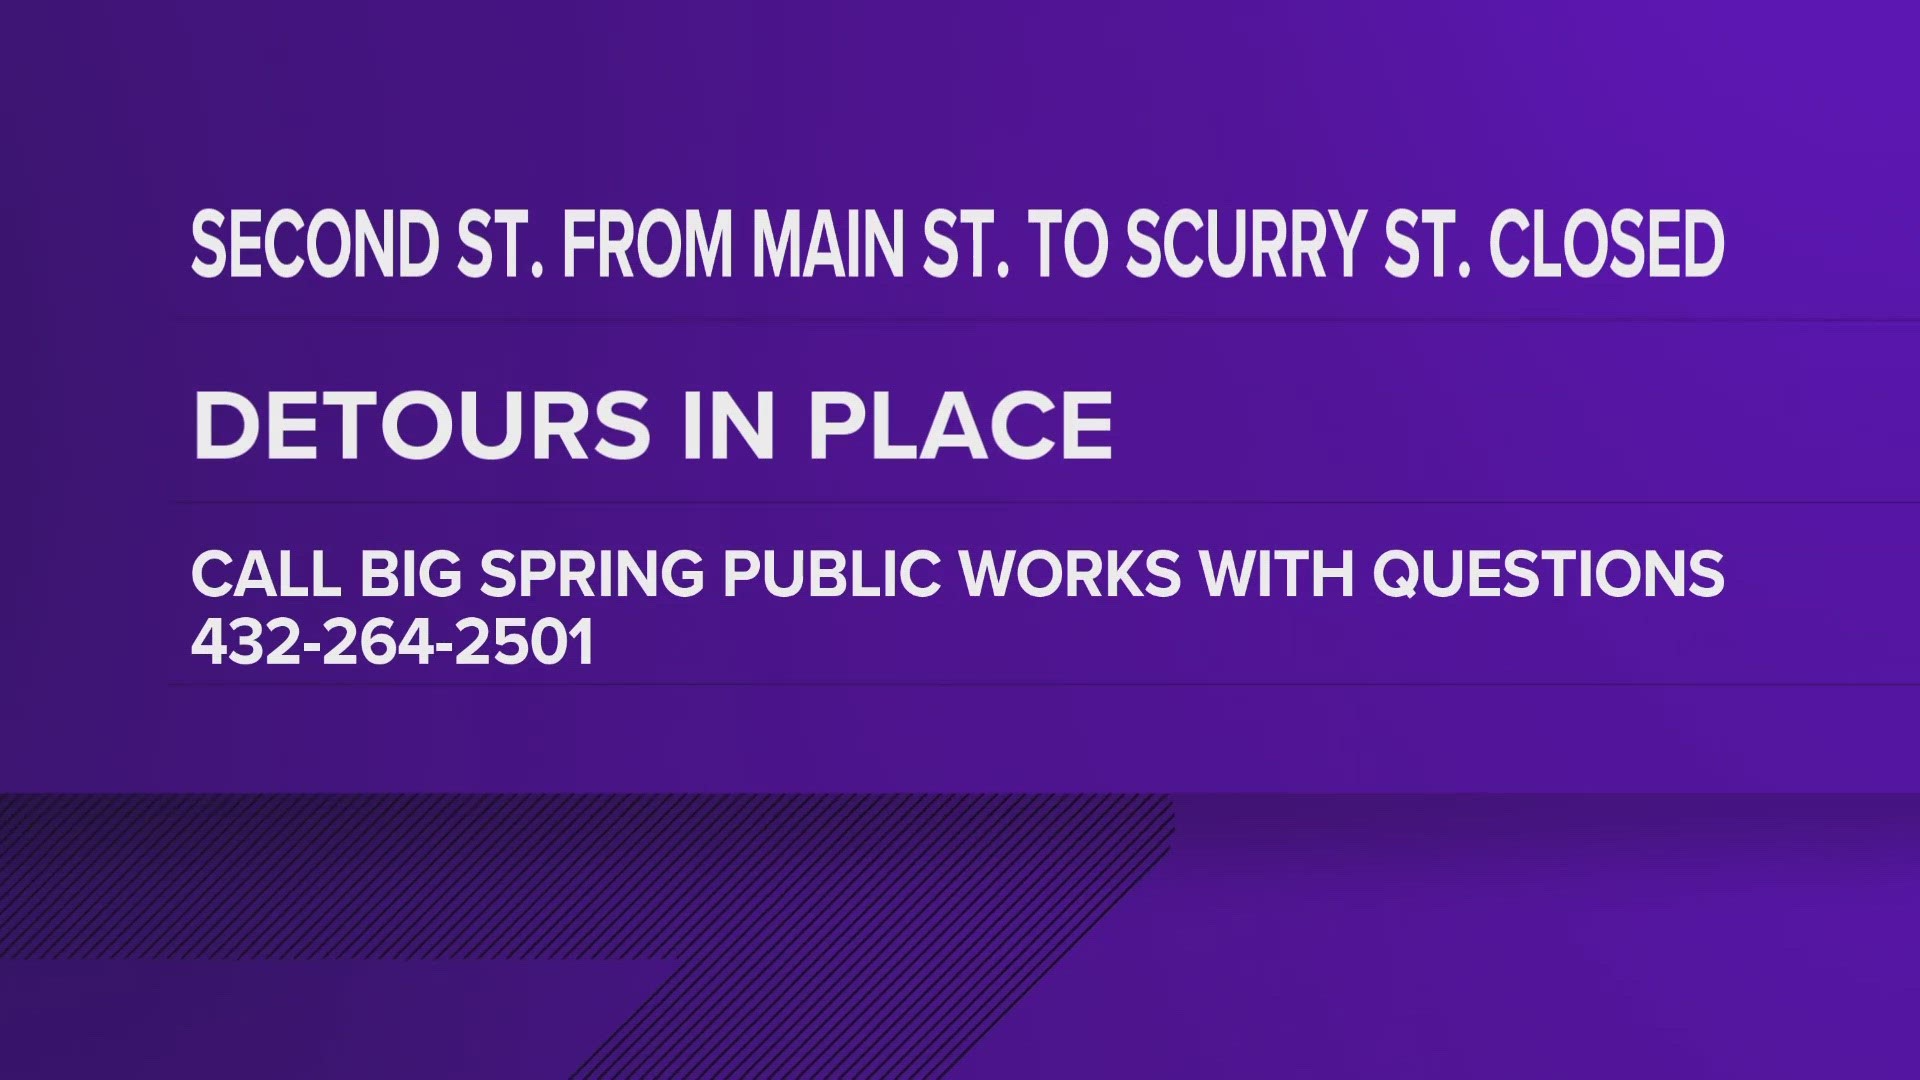 The closure will take place between Main Street and Scurry Street.